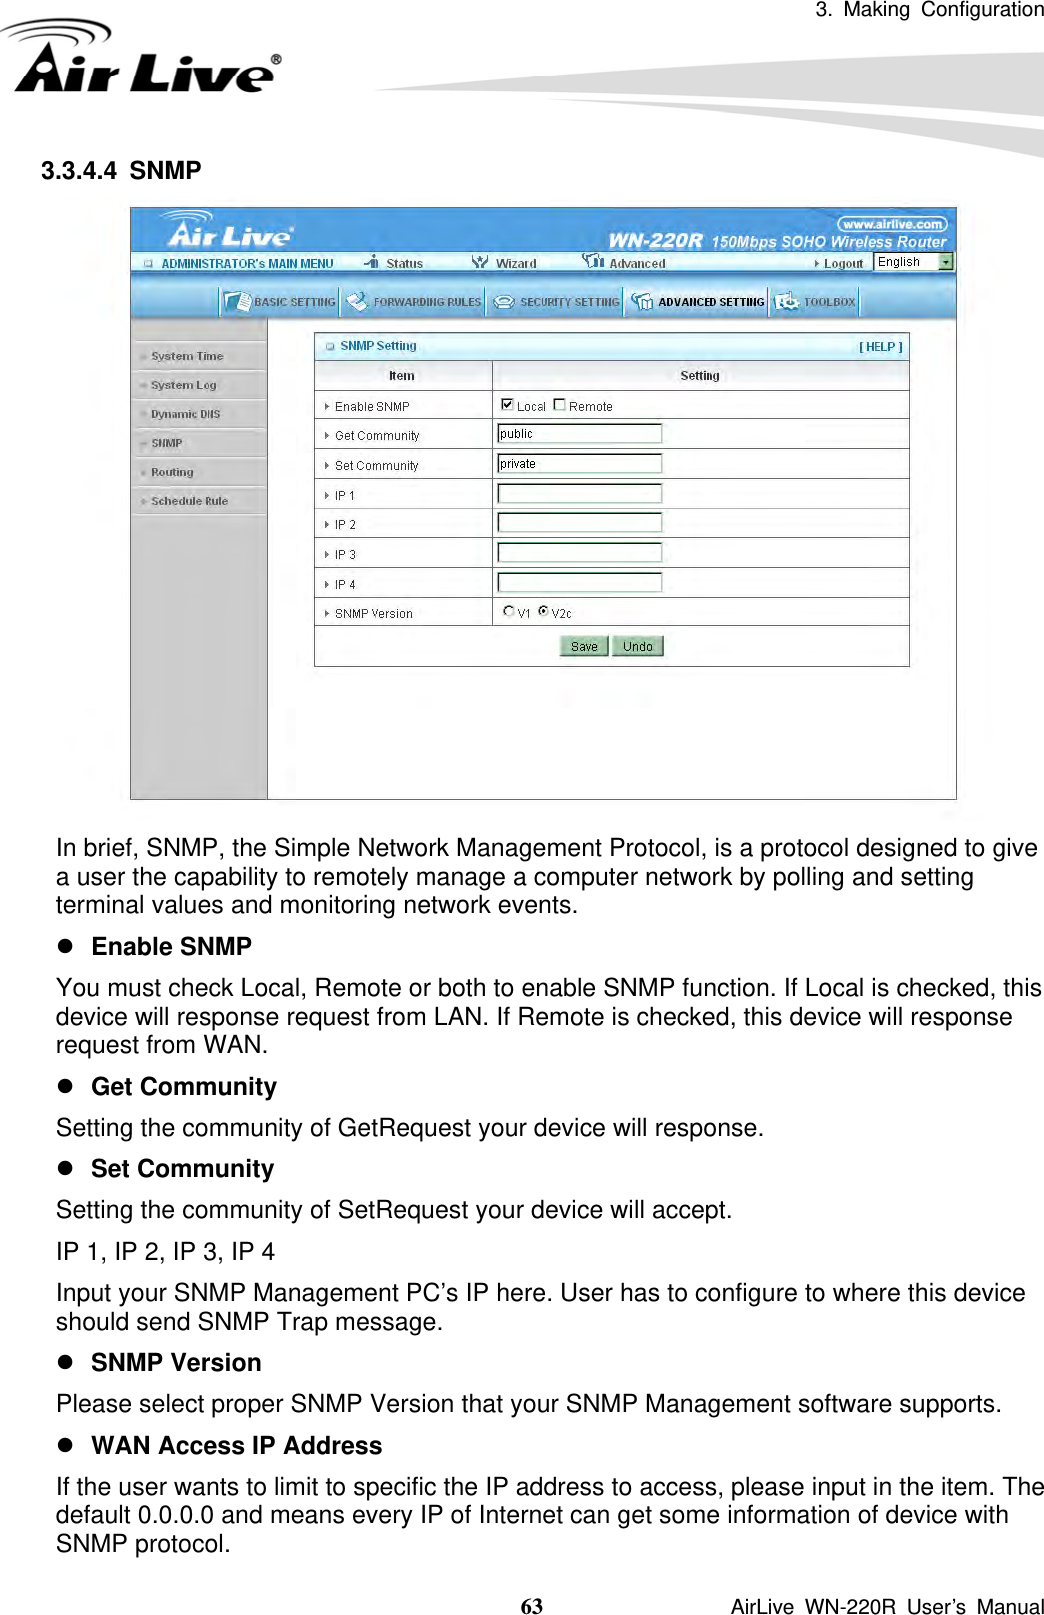 3. Making Configuration  63               AirLive WN-220R User’s Manual 3.3.4.4 SNMP  In brief, SNMP, the Simple Network Management Protocol, is a protocol designed to give a user the capability to remotely manage a computer network by polling and setting terminal values and monitoring network events.   z Enable SNMP You must check Local, Remote or both to enable SNMP function. If Local is checked, this device will response request from LAN. If Remote is checked, this device will response request from WAN.   z Get Community Setting the community of GetRequest your device will response.   z Set Community Setting the community of SetRequest your device will accept.   IP 1, IP 2, IP 3, IP 4 Input your SNMP Management PC’s IP here. User has to configure to where this device should send SNMP Trap message. z SNMP Version Please select proper SNMP Version that your SNMP Management software supports. z WAN Access IP Address   If the user wants to limit to specific the IP address to access, please input in the item. The default 0.0.0.0 and means every IP of Internet can get some information of device with SNMP protocol.   